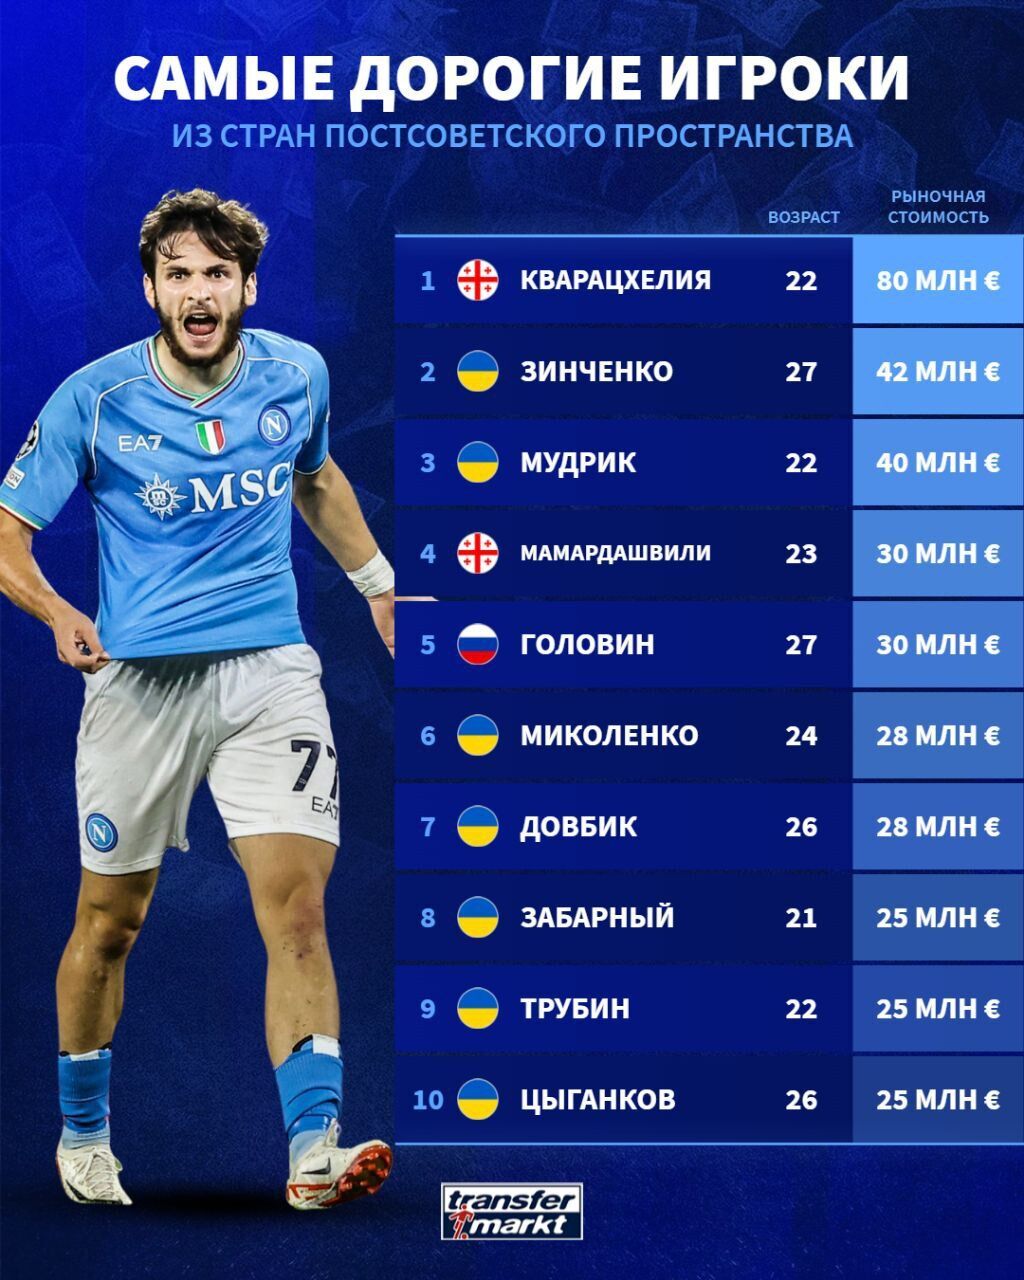 7 out of 10 are Ukrainians: the most expensive CIS footballers in the world have been named